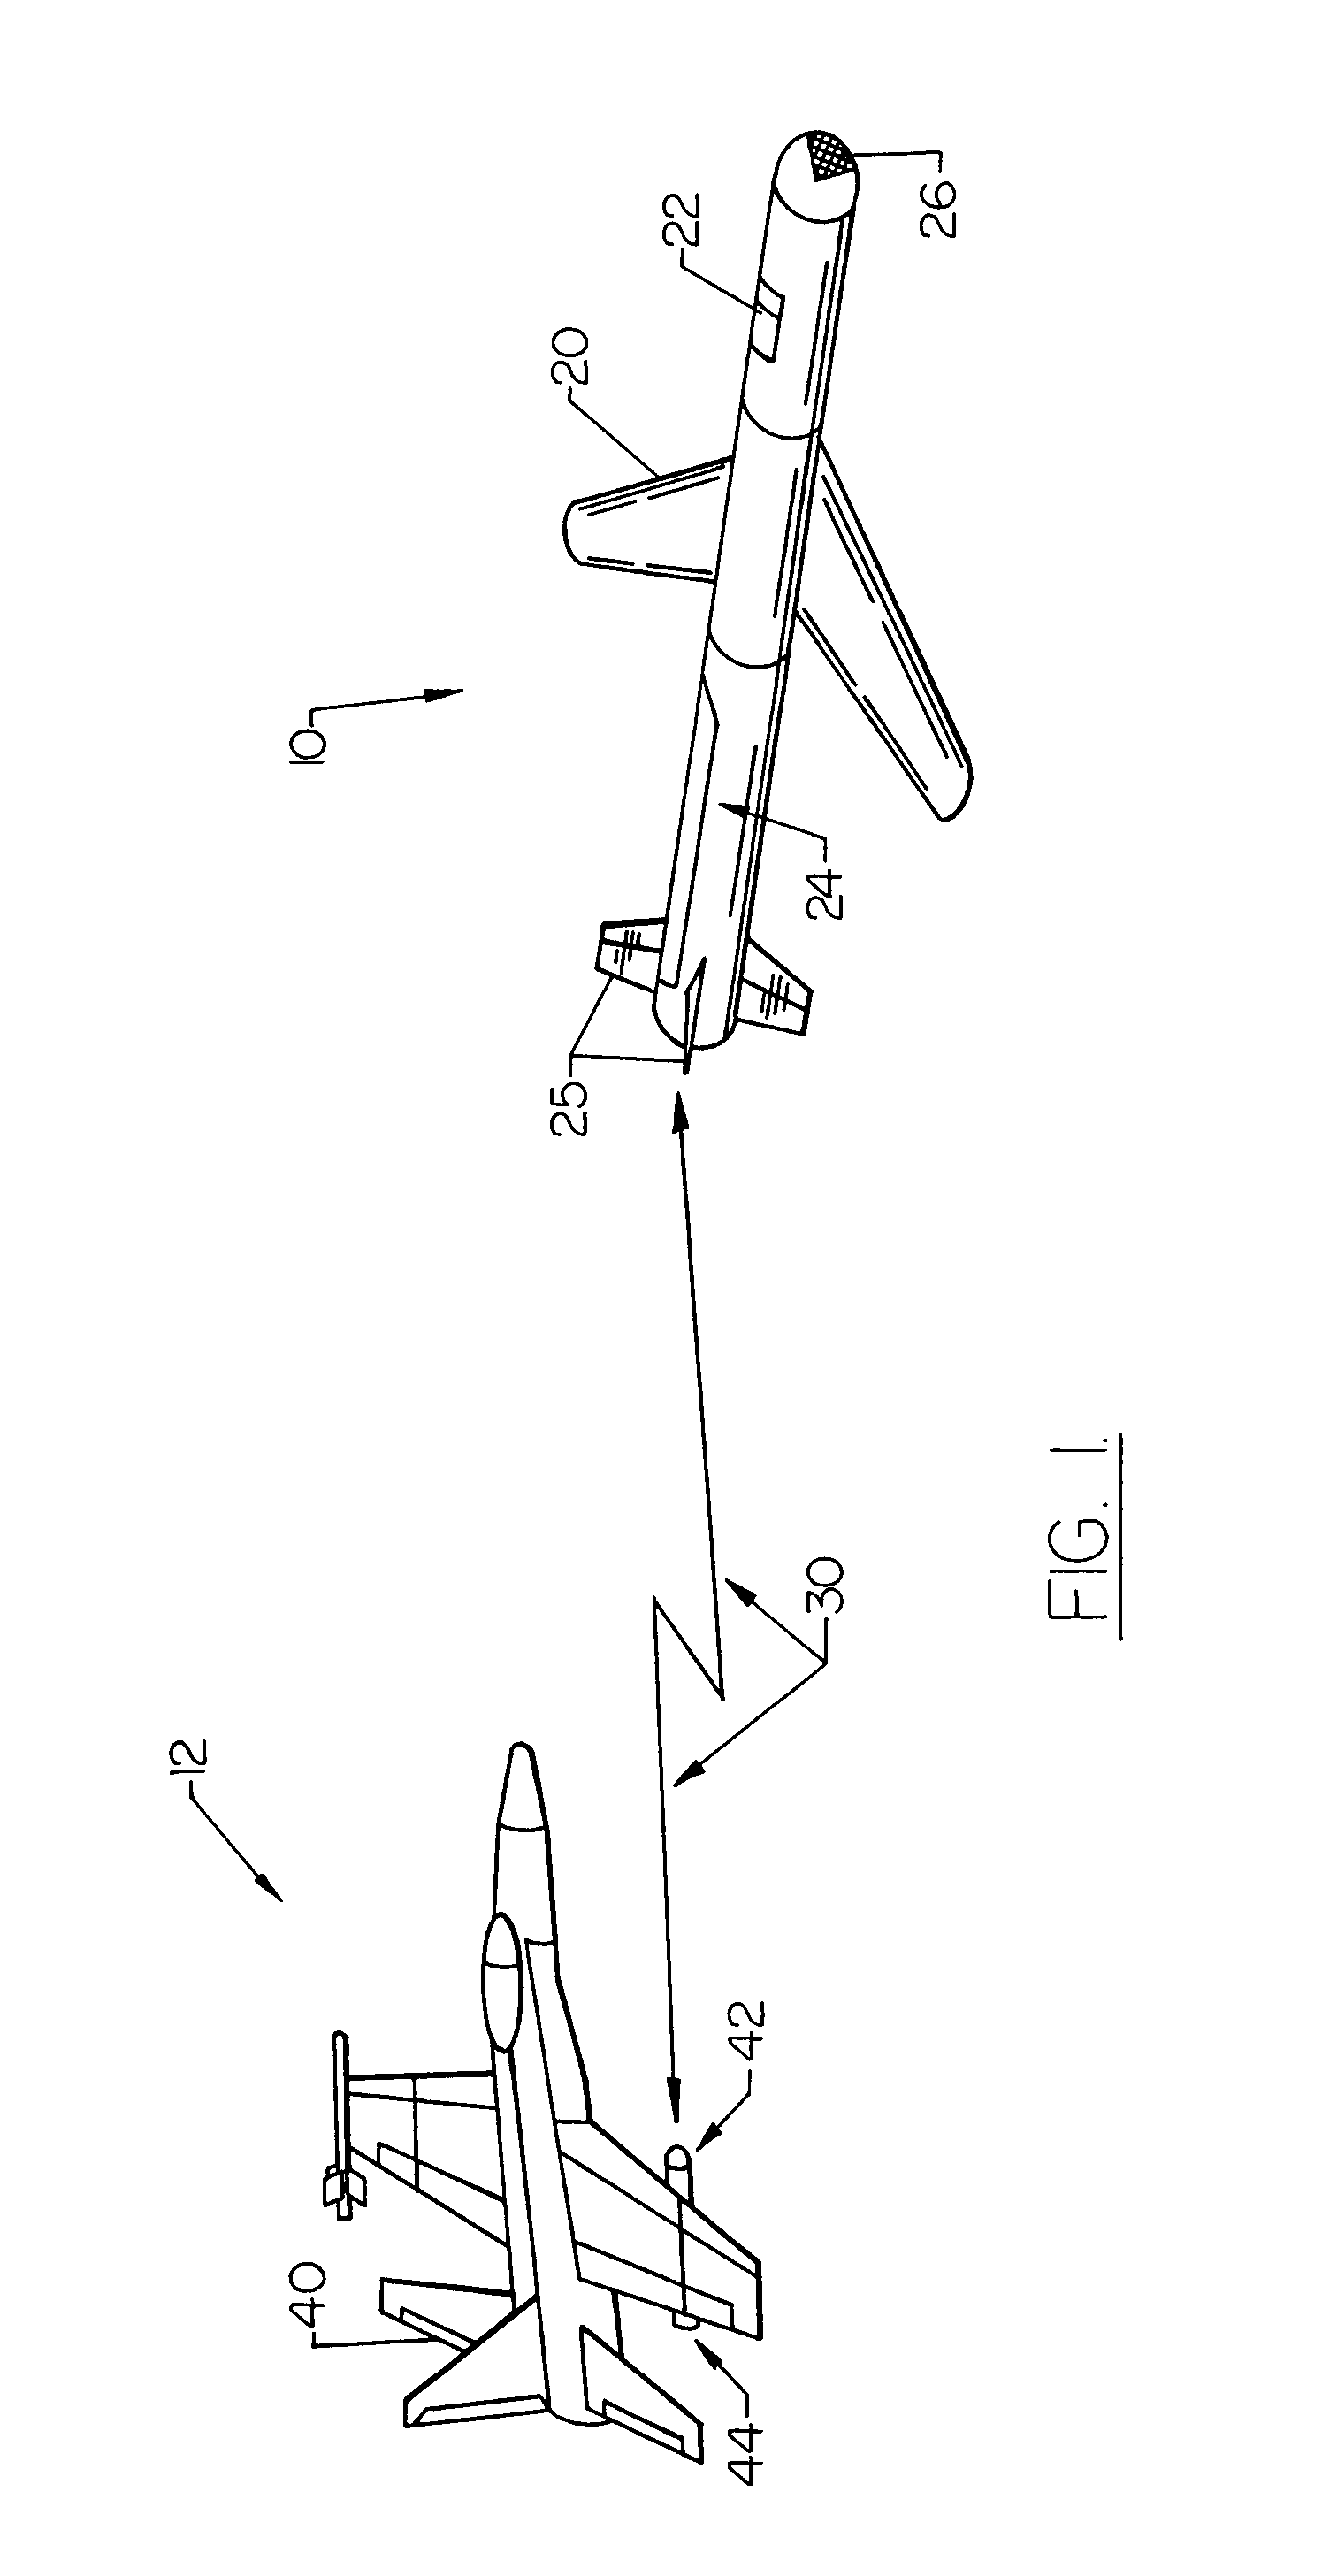 System and method for designating a target for a remote aerial vehicle